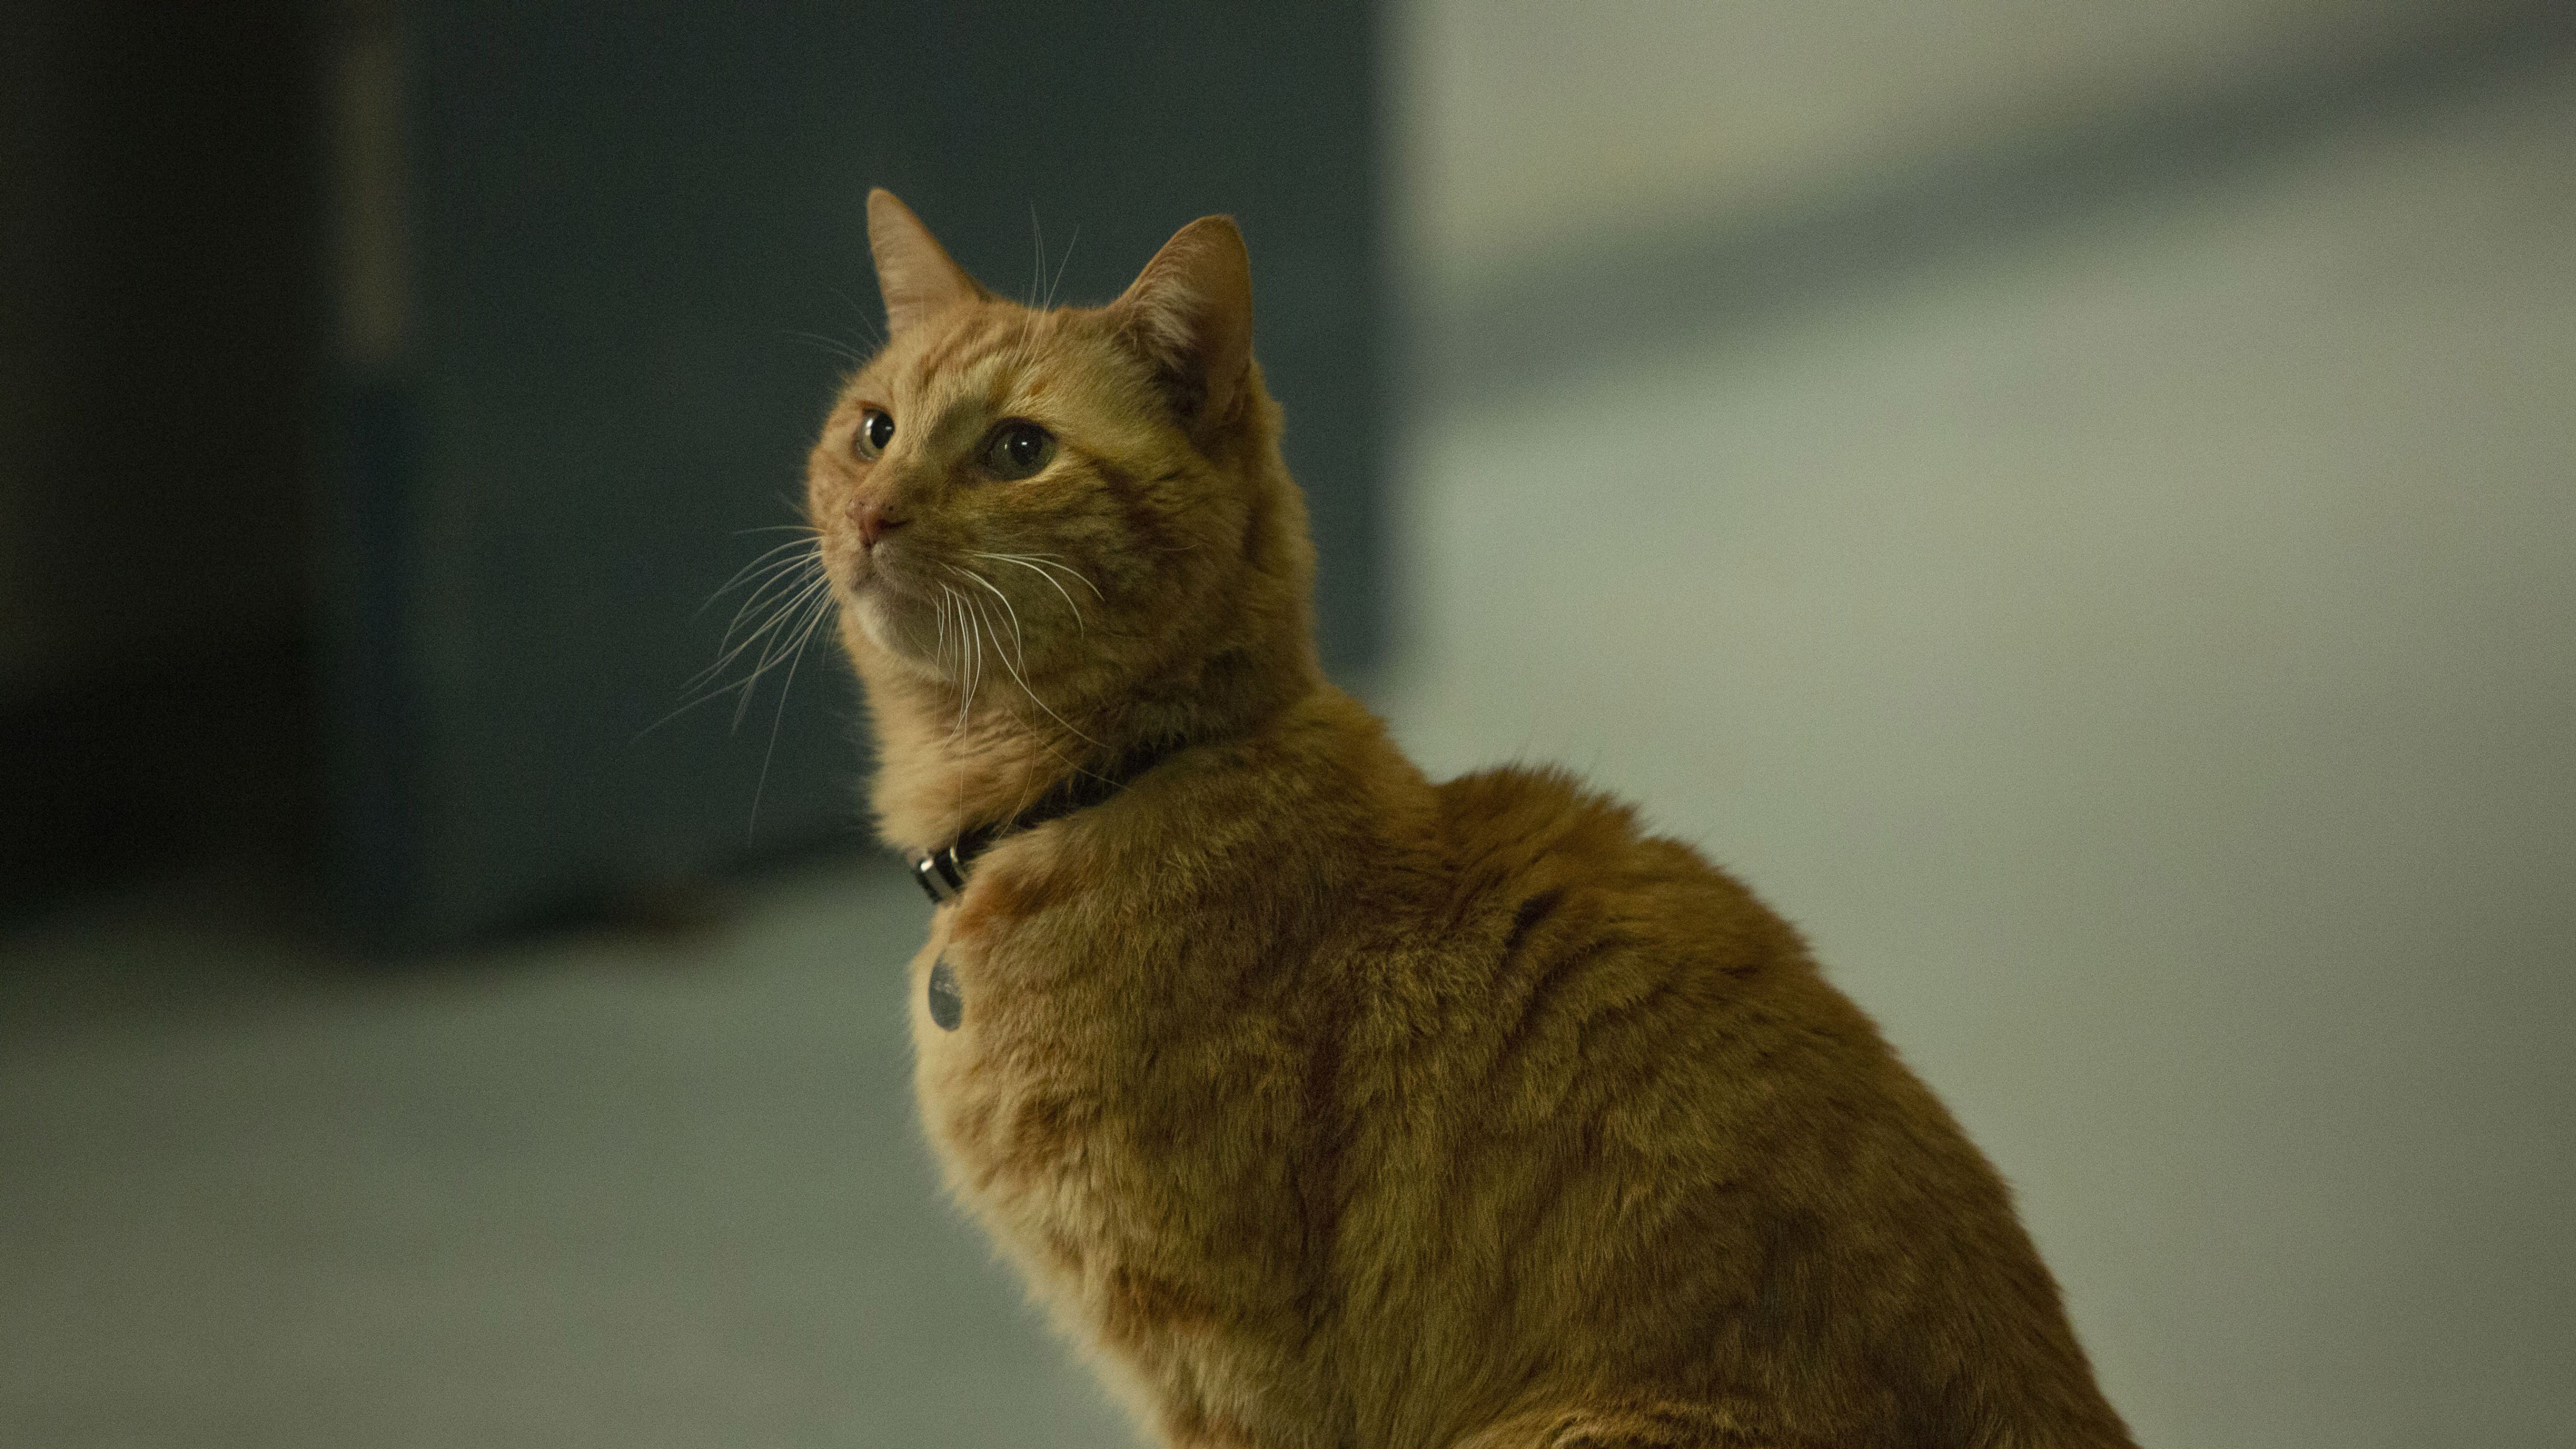 Goose The Cat in Captain Marvel 5K Image, HD Movies 4K